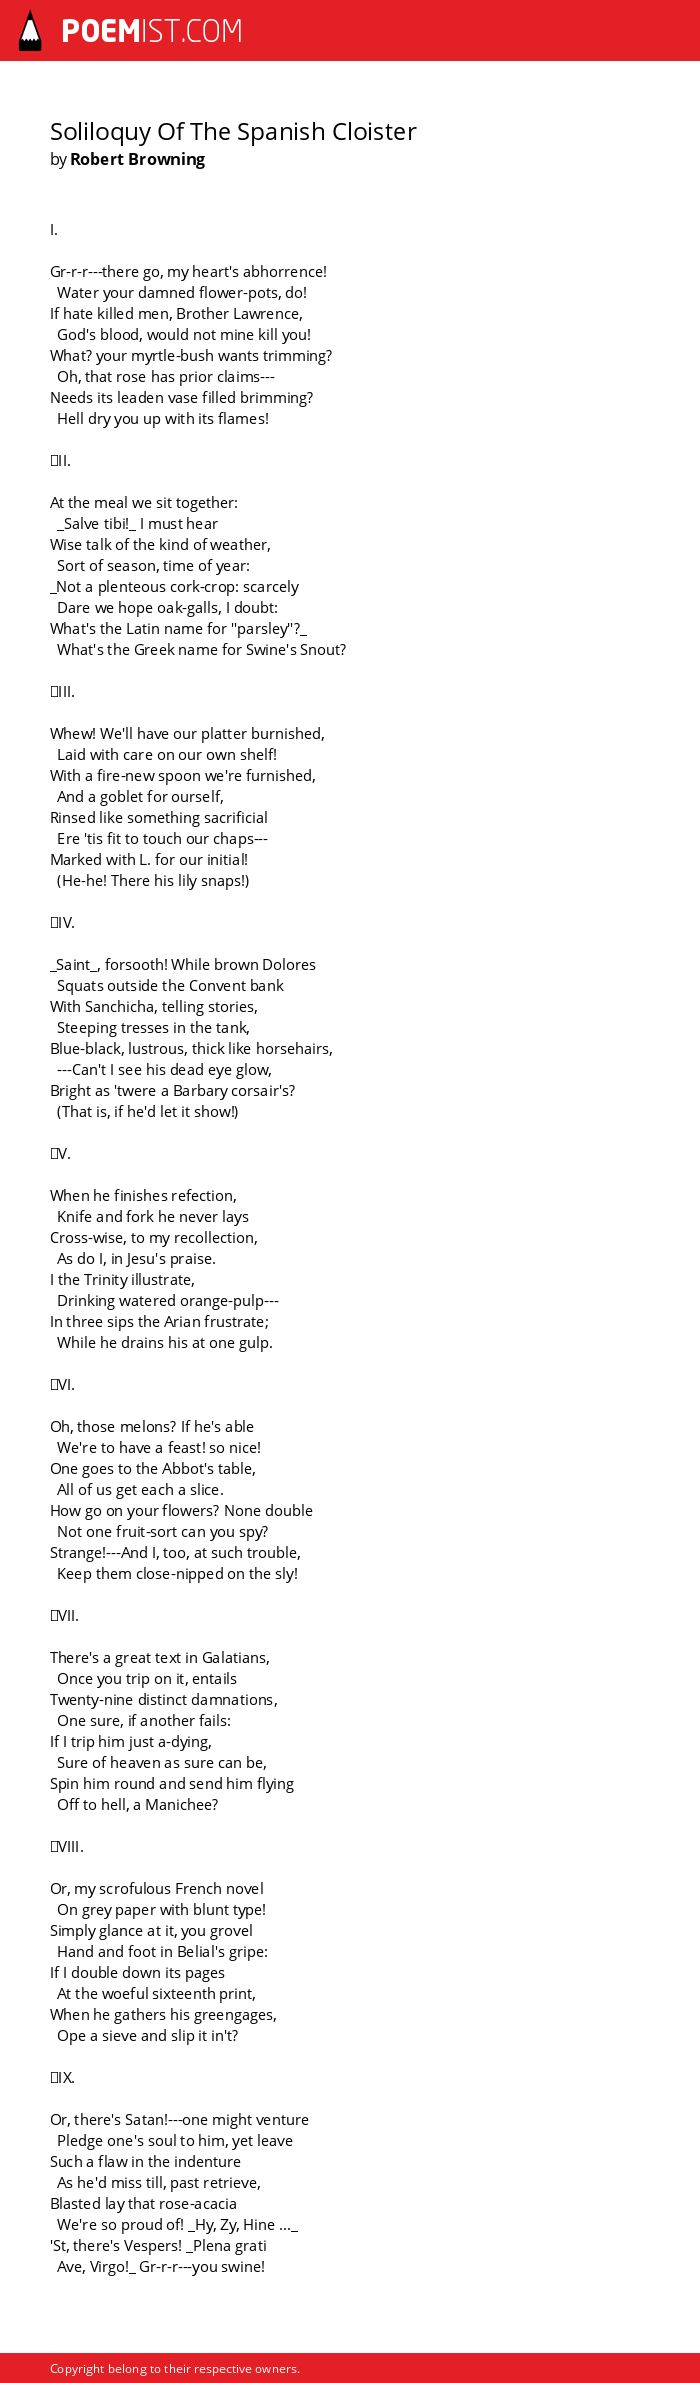 robert browning soliloquy of the spanish cloister